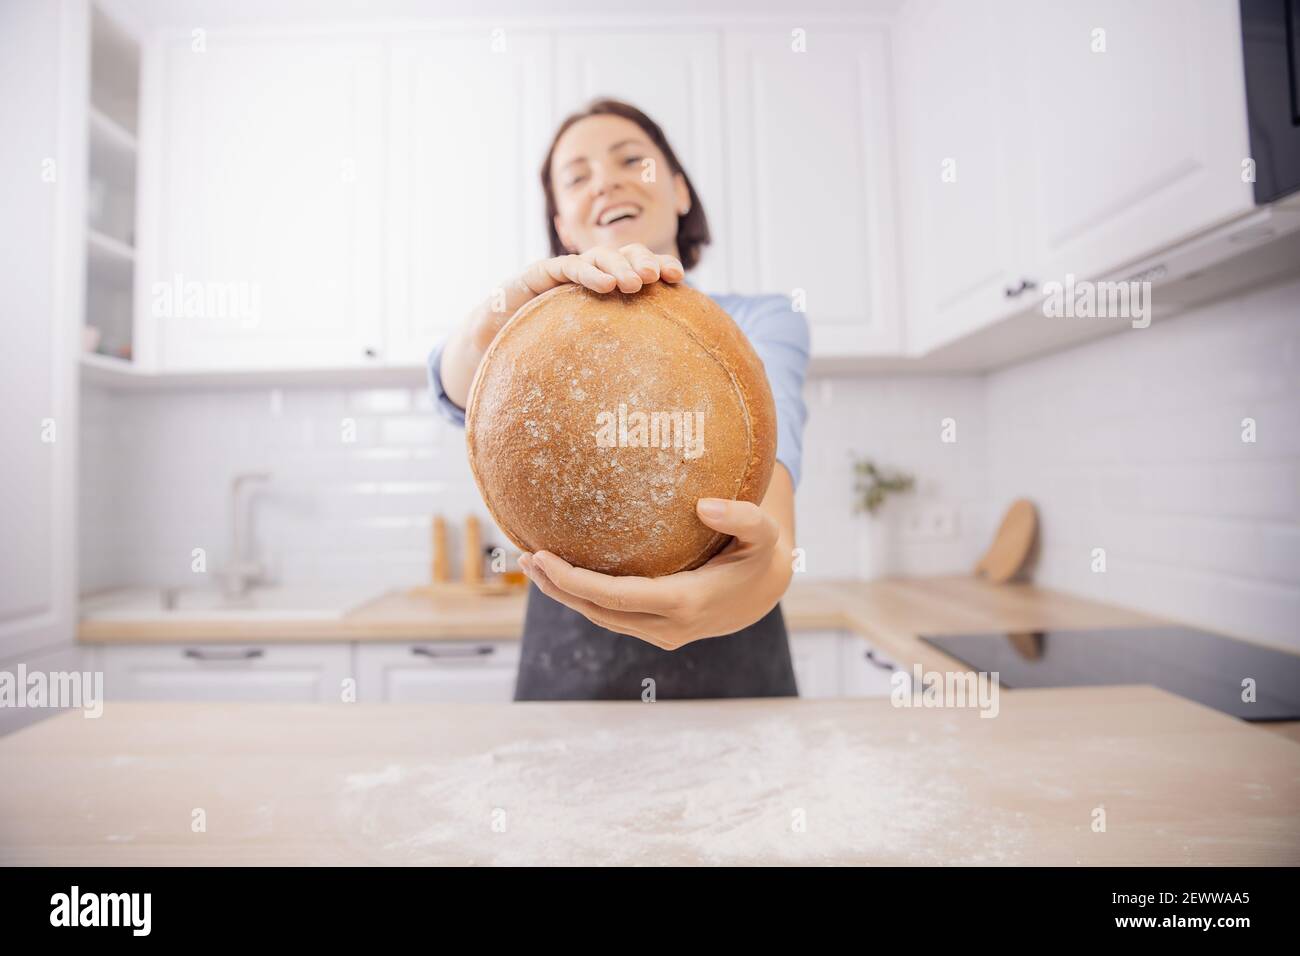 Baker hand wheaten Round loaf of bread lies on table with flour, background white kitchen. Stock Photo